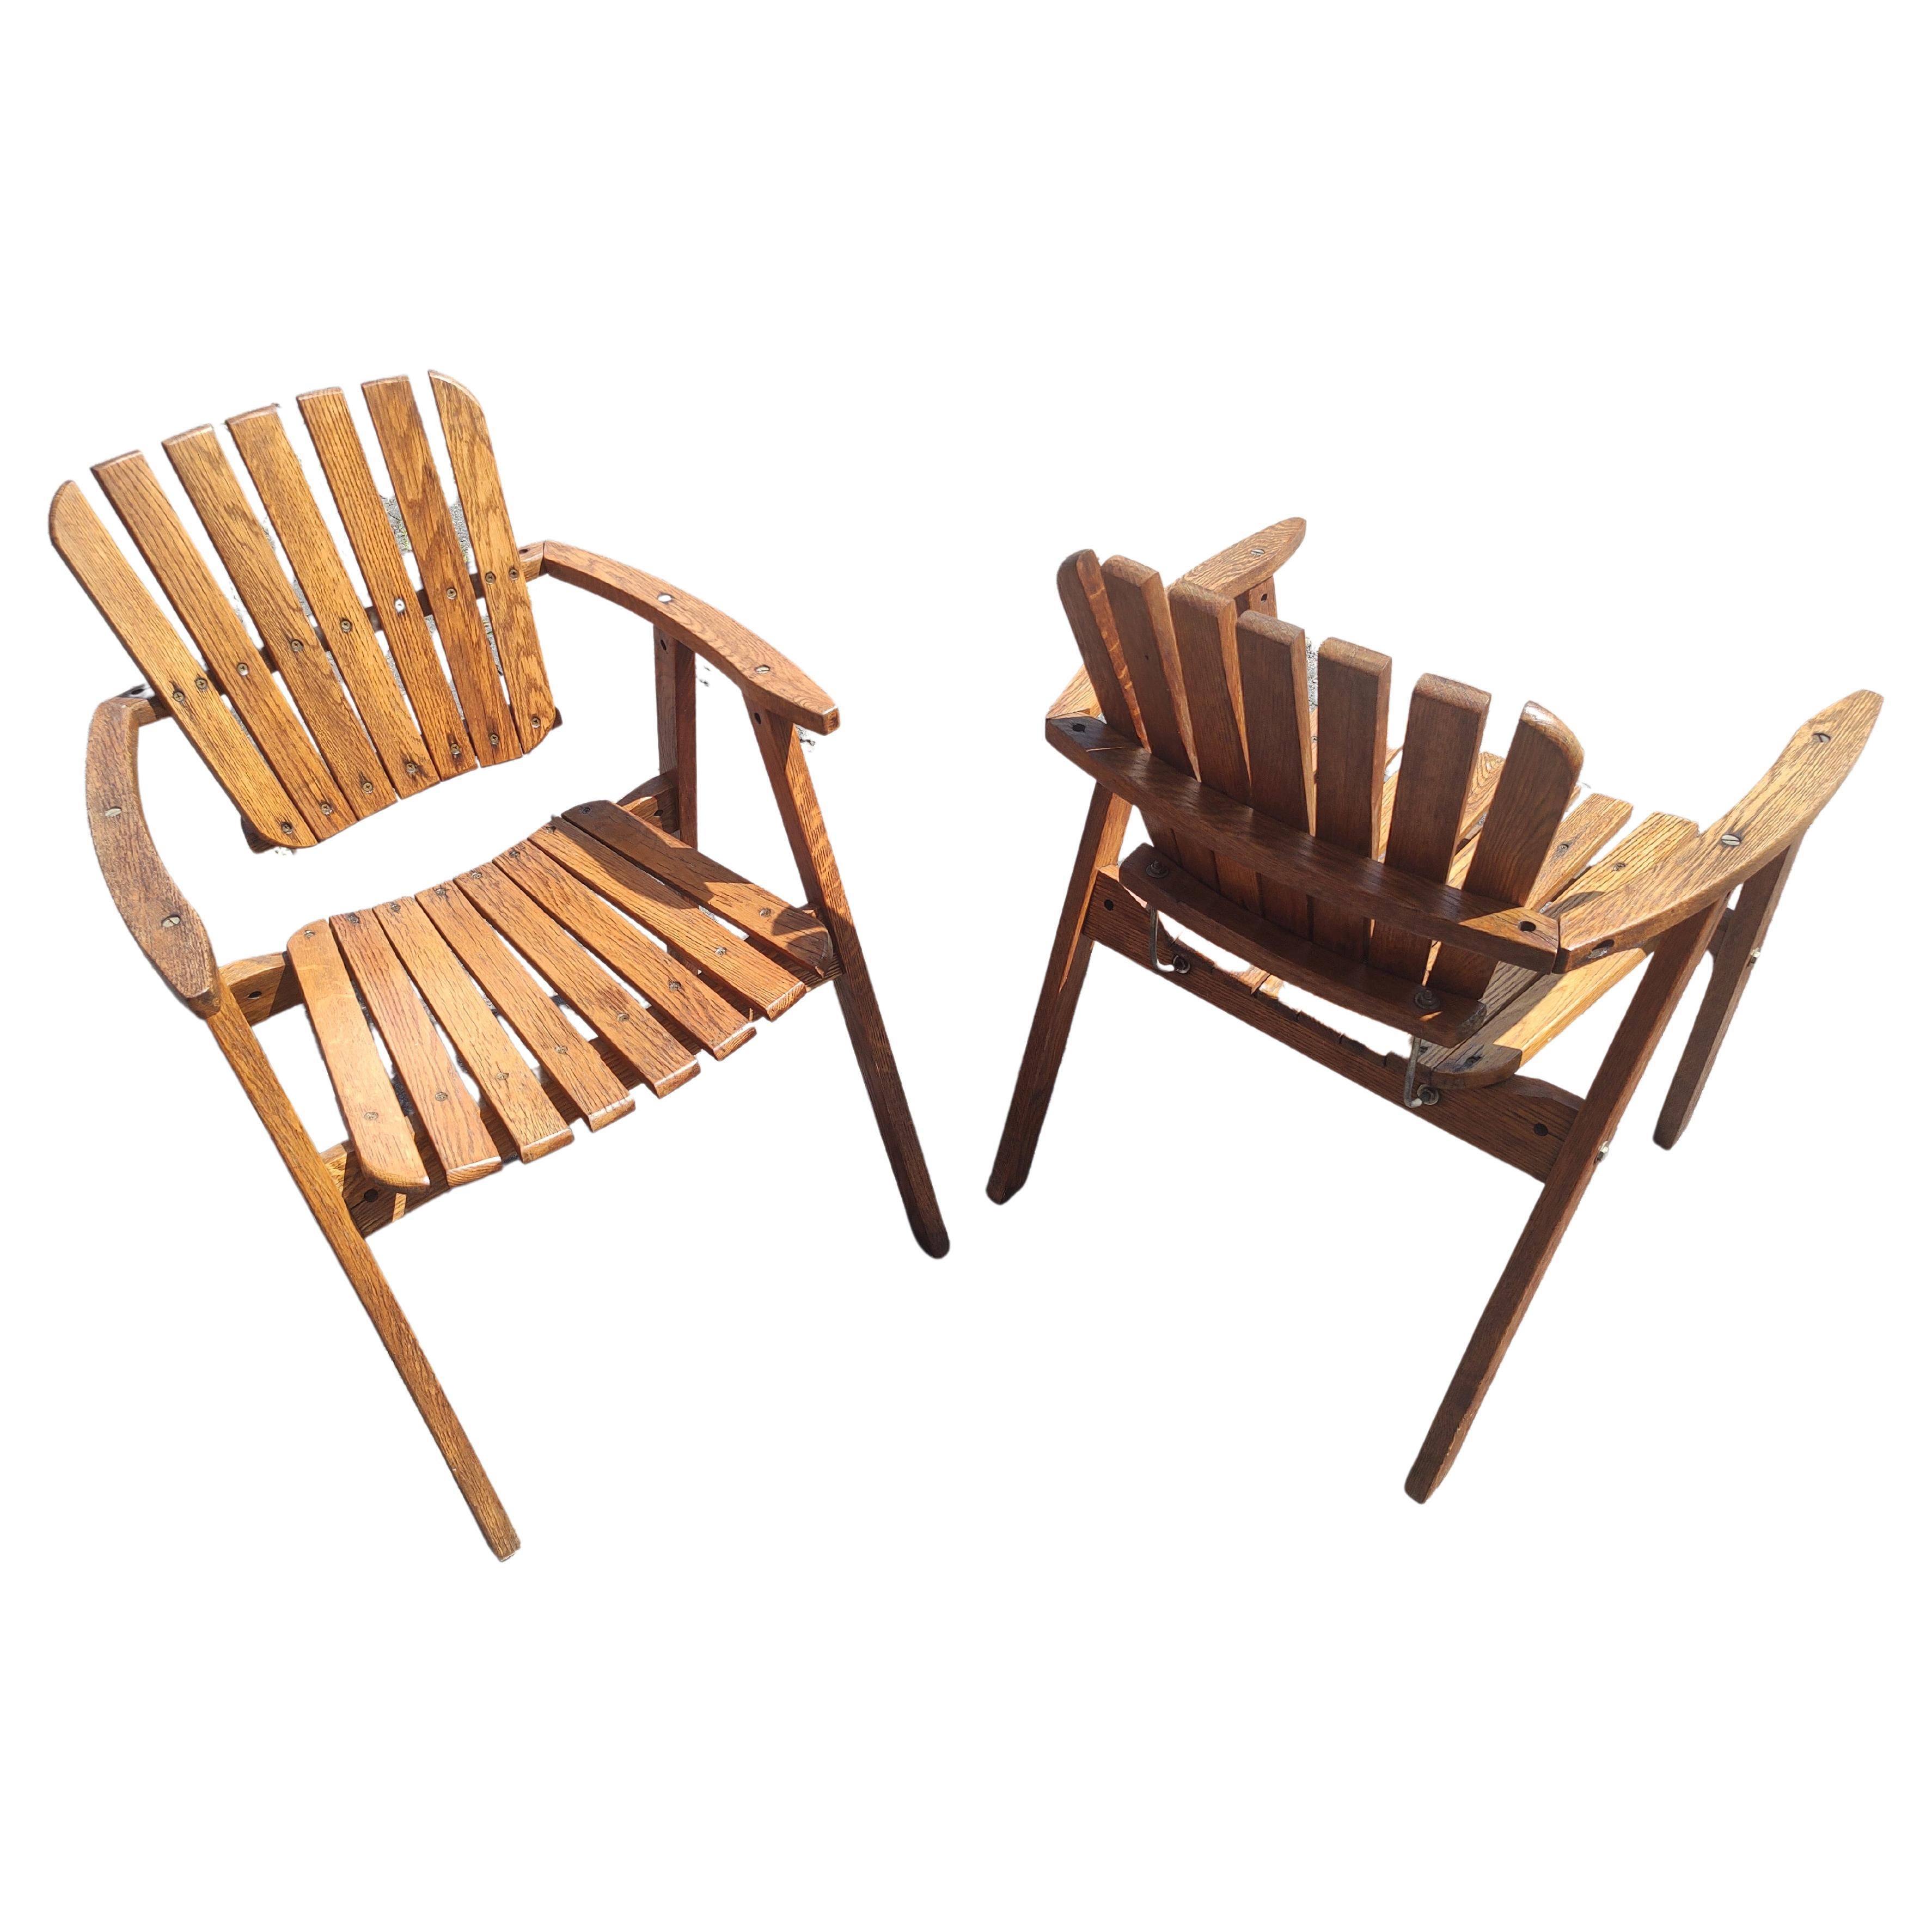 Fabulous pair of Mid Century Modern Sculptural Oak armchairs suitable for an enclosed or covered porch. Solid slatted oak seat and backs with an iron support system for the back. Style of Carlo Hauner & Martin Eisler a design team from South